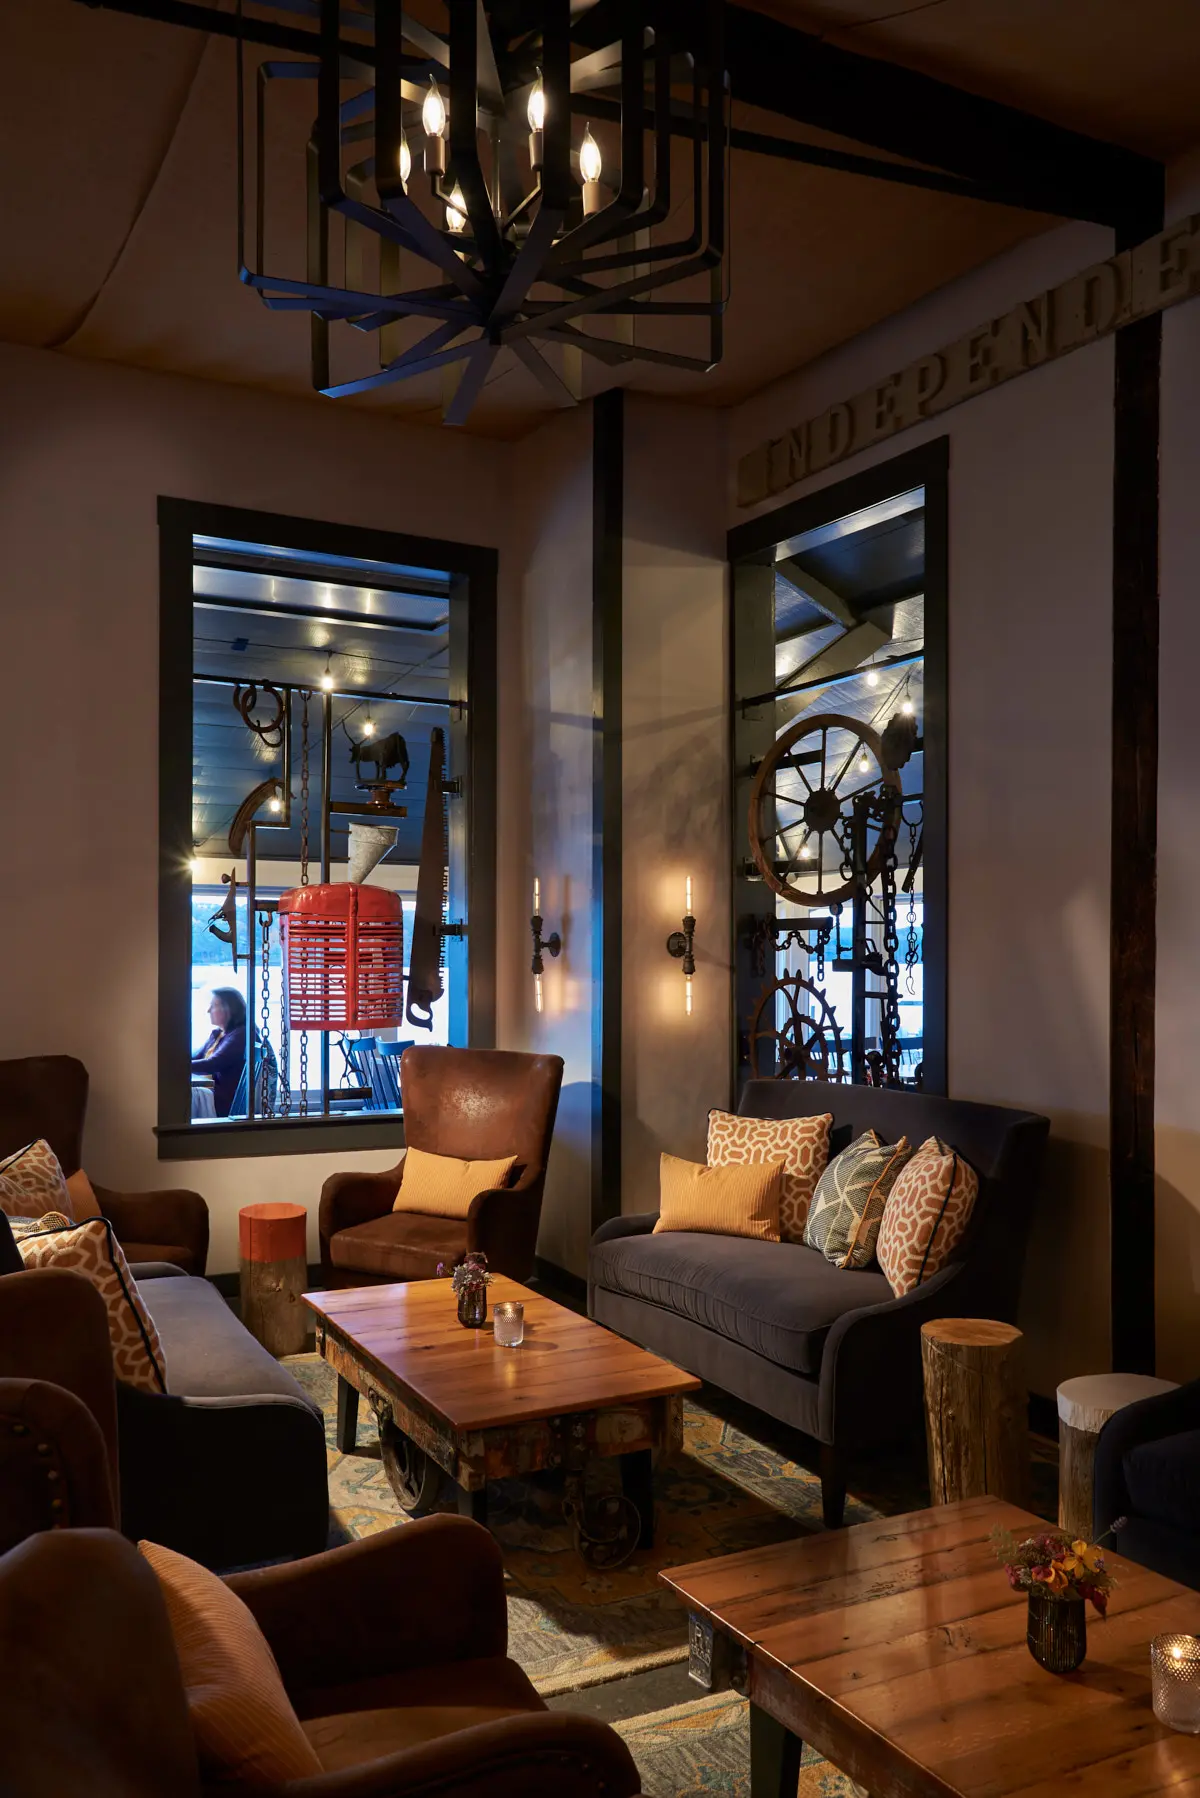 A view of the industrial rustic style of the lounge space at Water Street